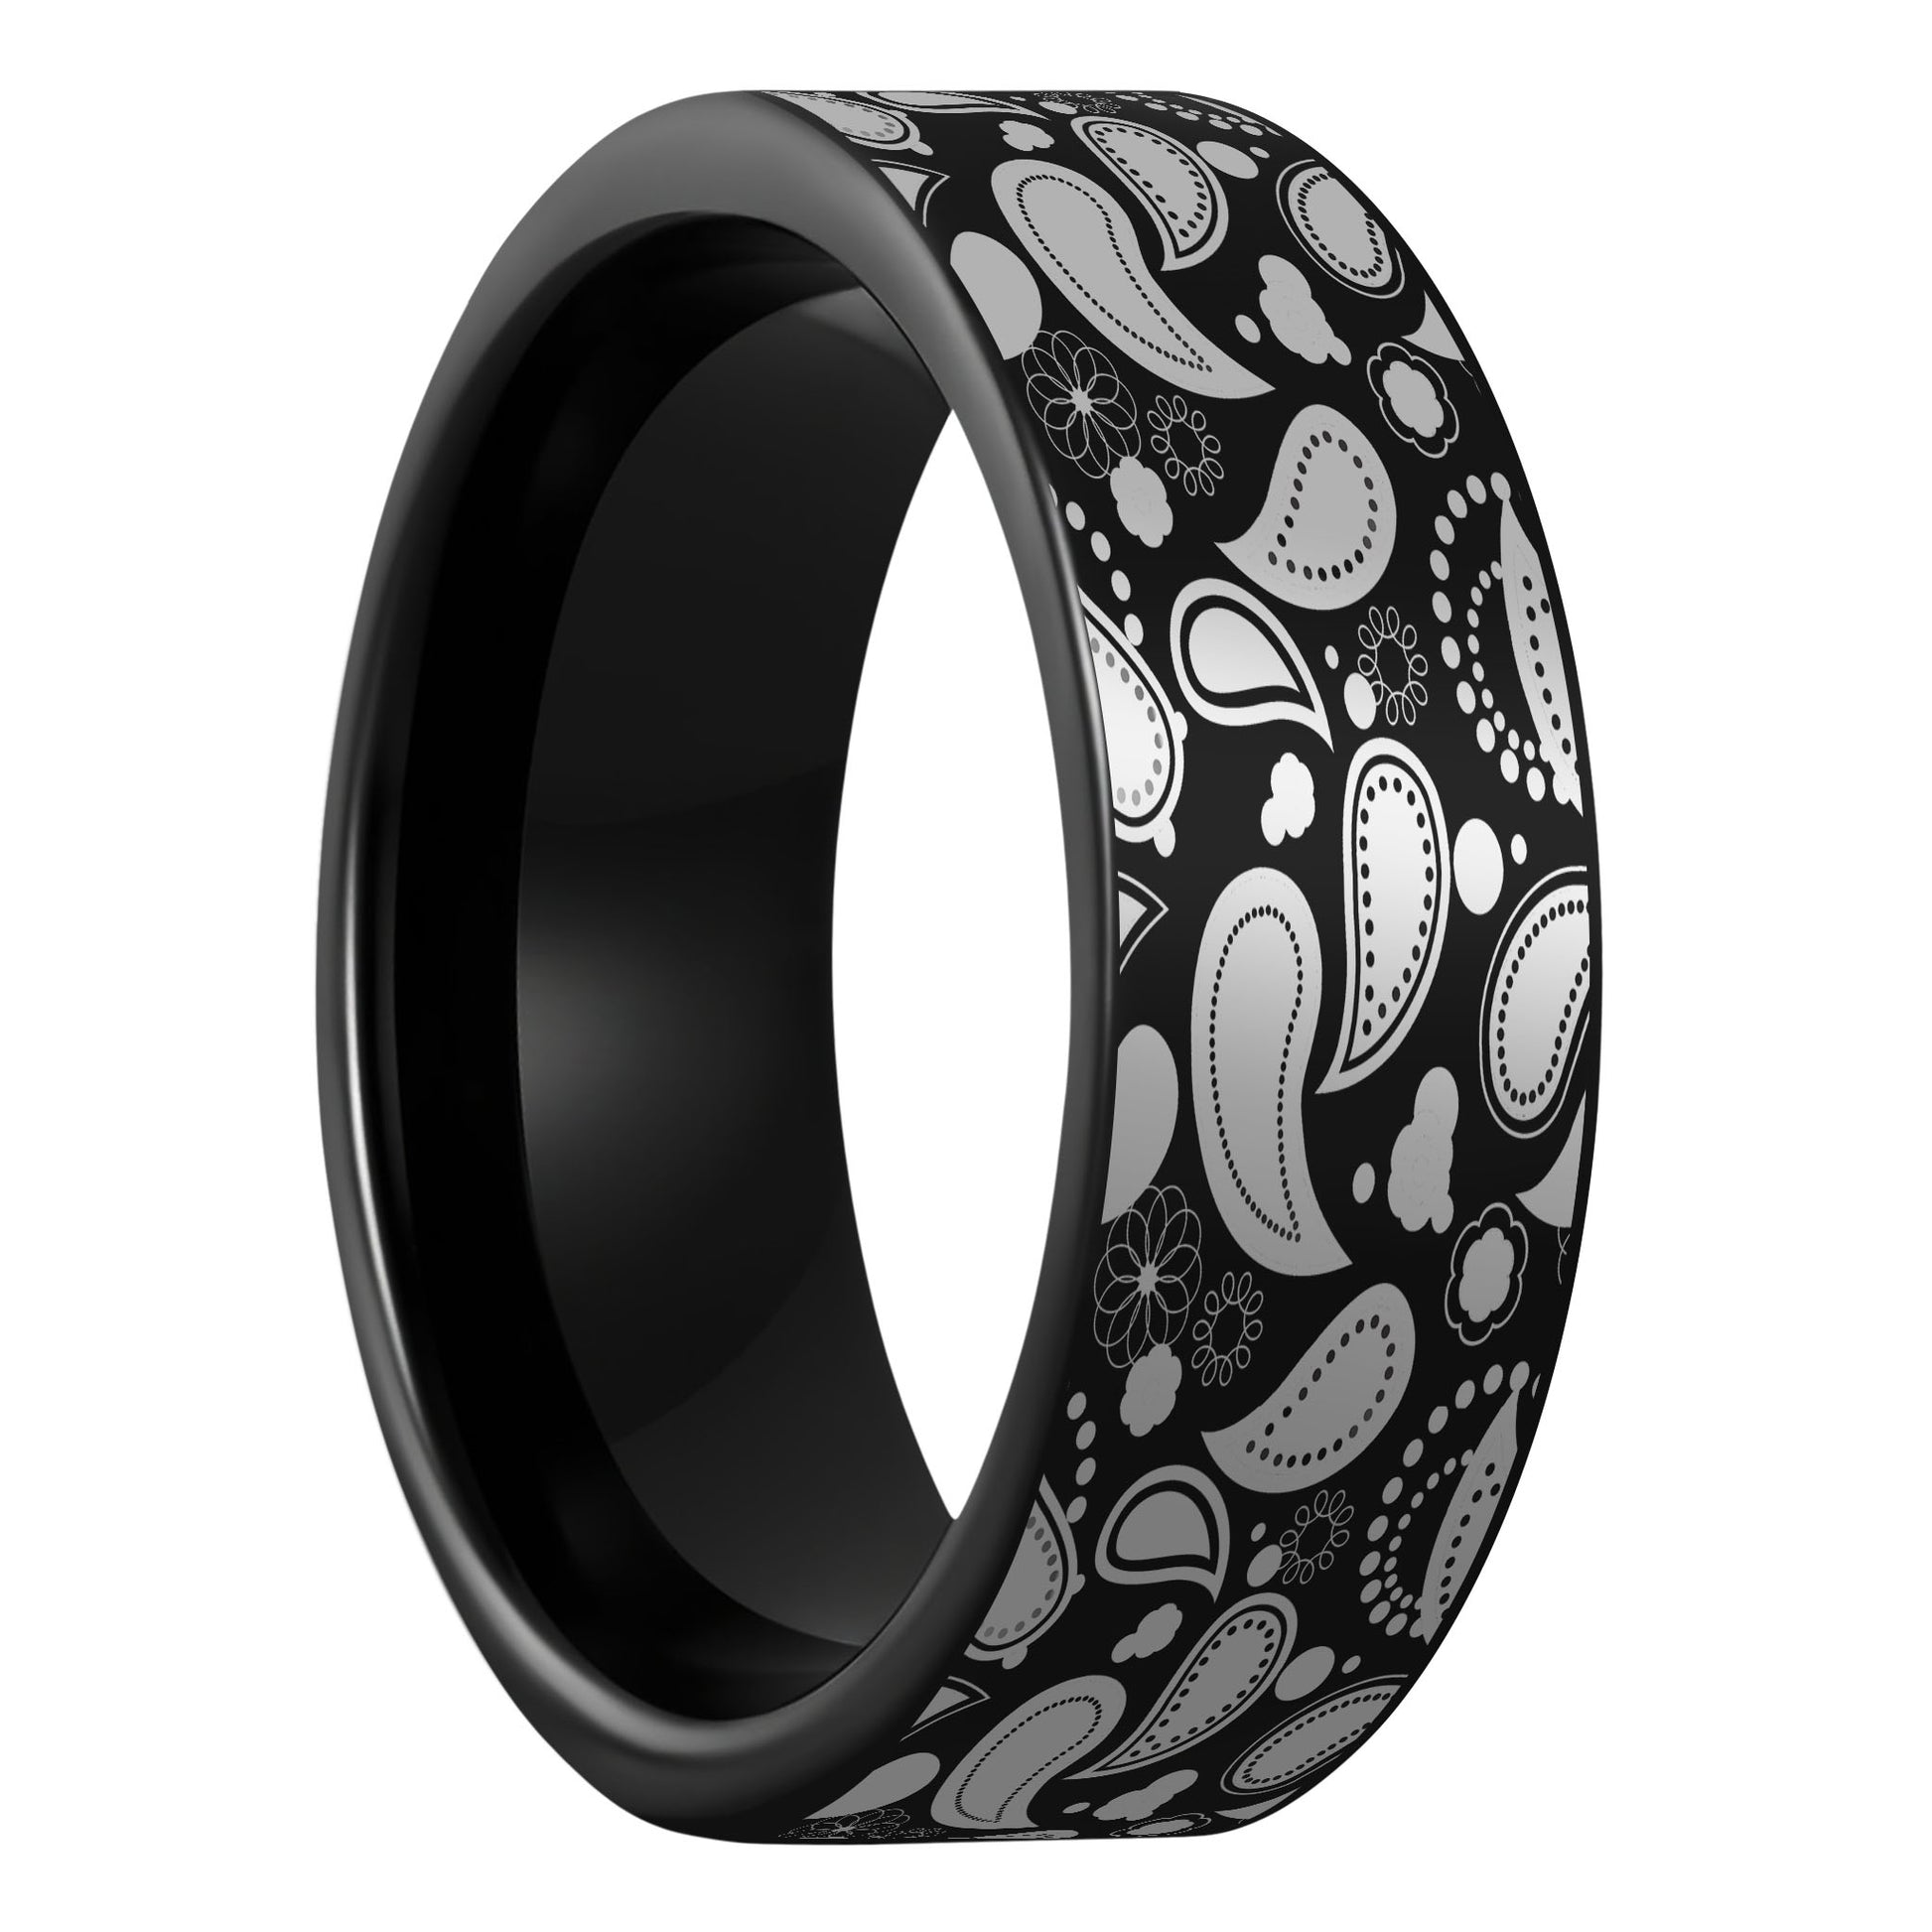 One Paisley Pattern Black Tungsten Men's Wedding Band displayed on a plain white background